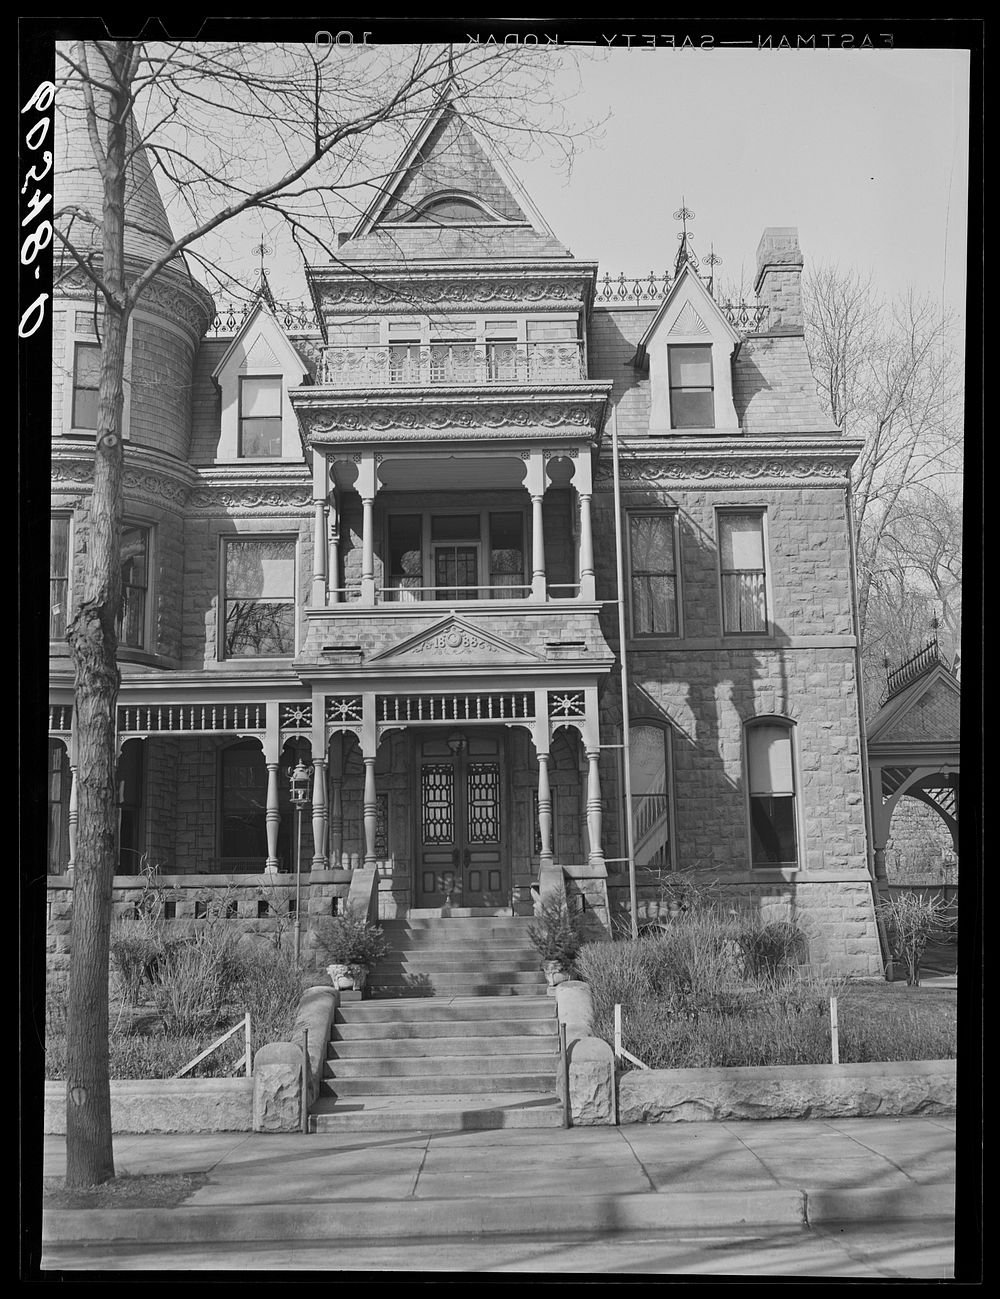 Victorian house. Dubuque, Iowa. Sourced from the Library of Congress.